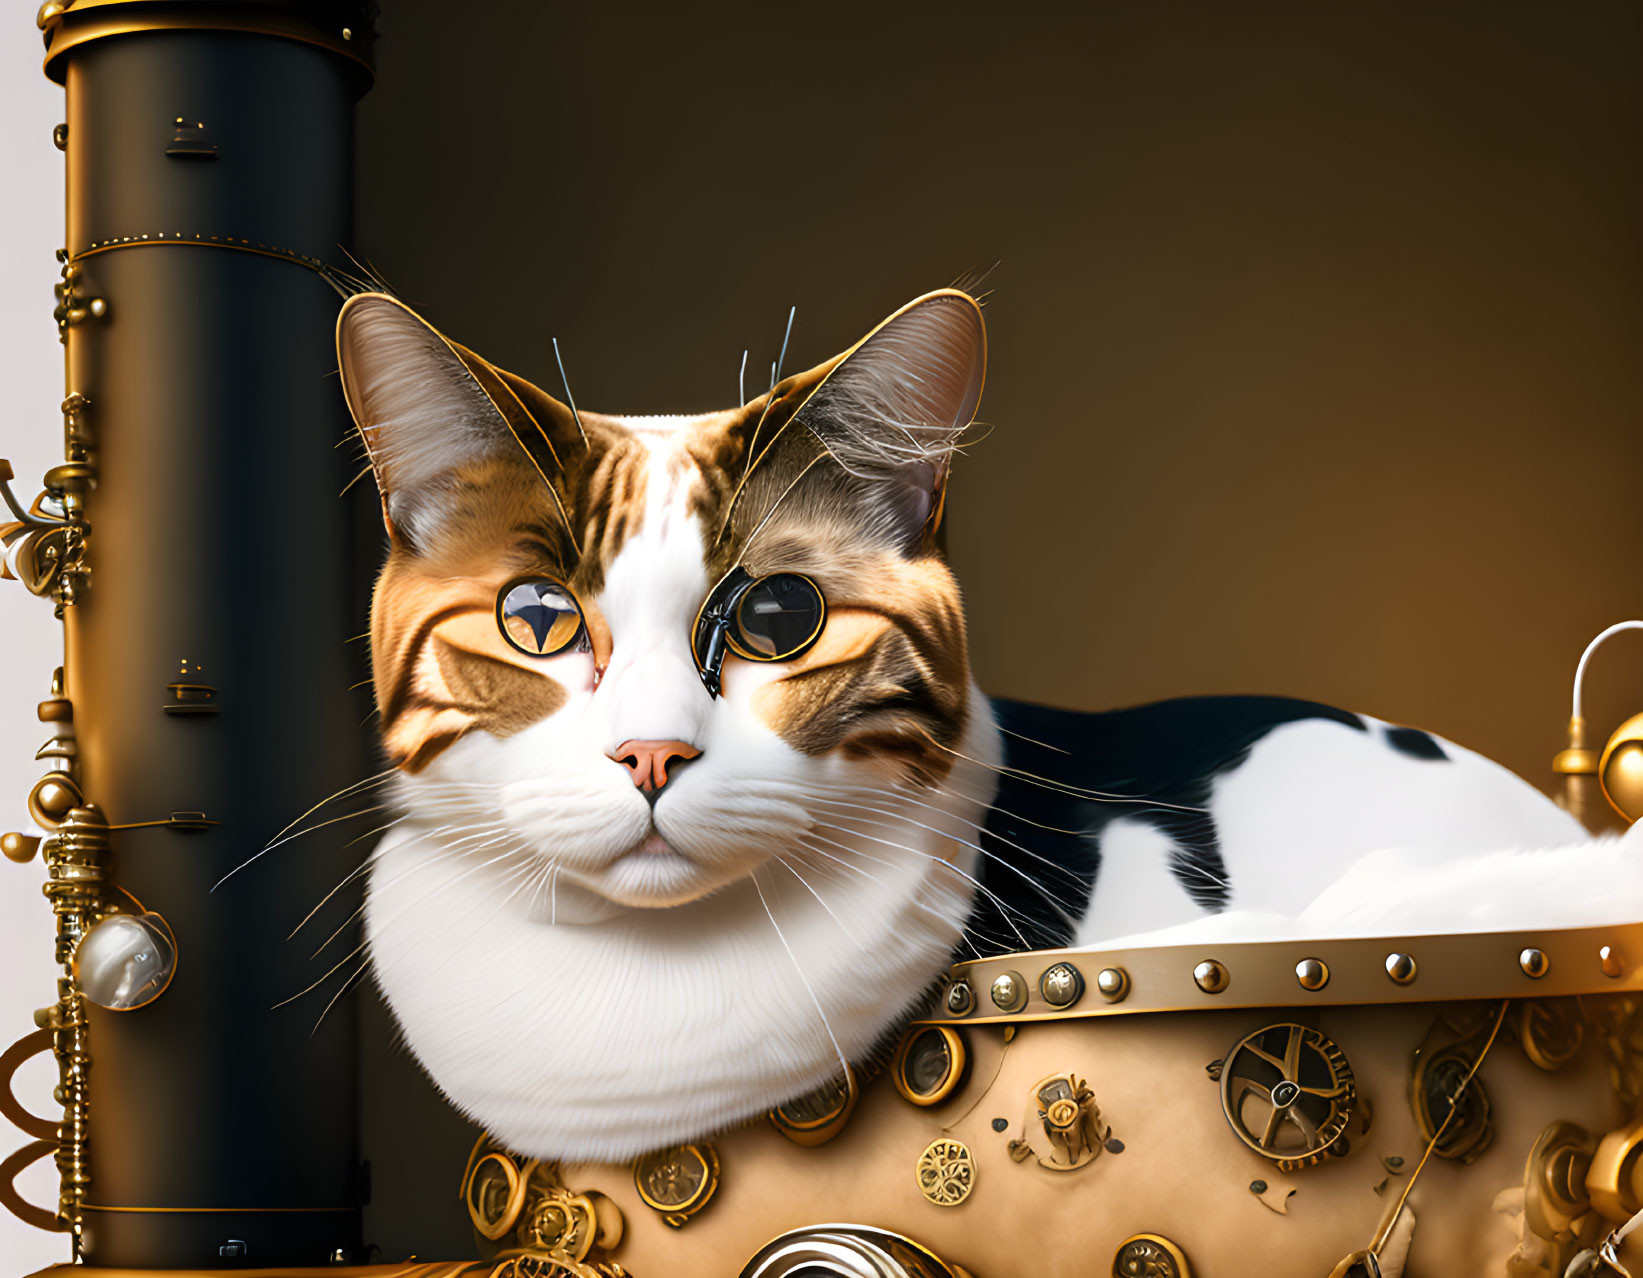 Steampunk-themed digital art: Cat with mechanical elements and brass textures on warm backdrop